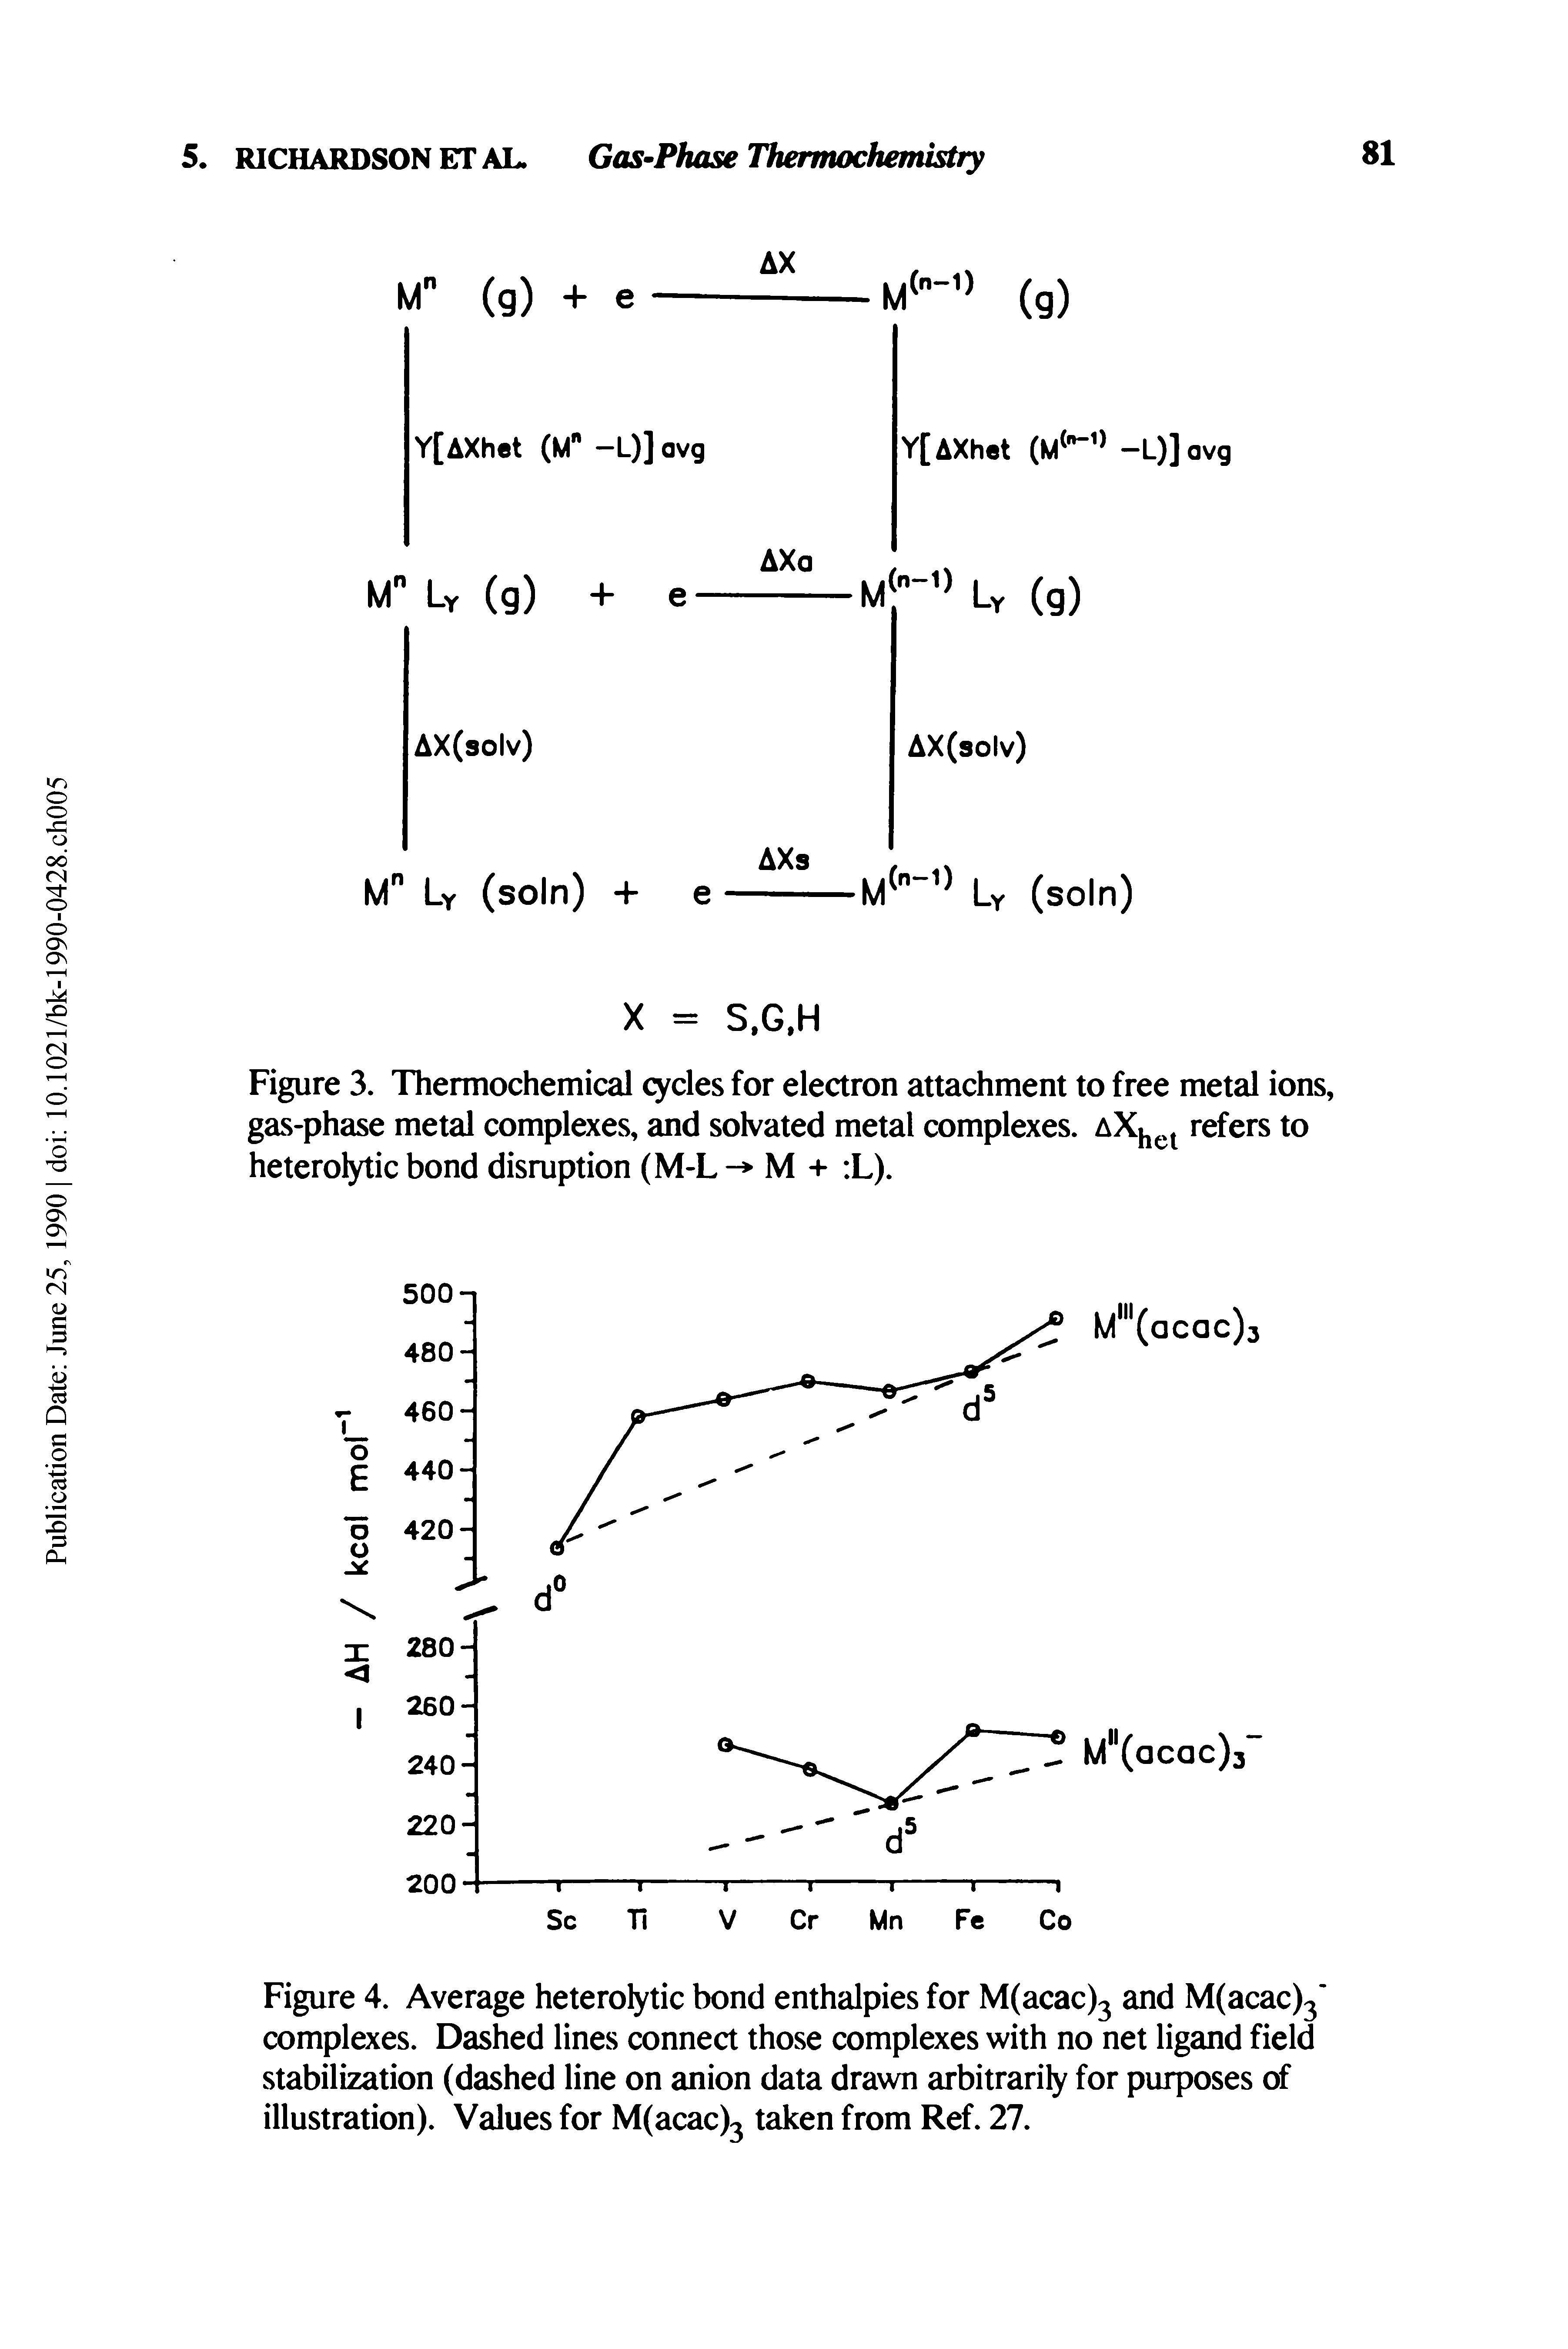 Figure 4. Average heterolytic bond enthalpies for M(acac)3 and M(acac)3 complexes. Dashed lines connect those complexes with no net ligand field stabilization (dashed line on anion data drawn arbitrarily for purposes of illustration). Values for M(acac)3 taken from Ref. 27.